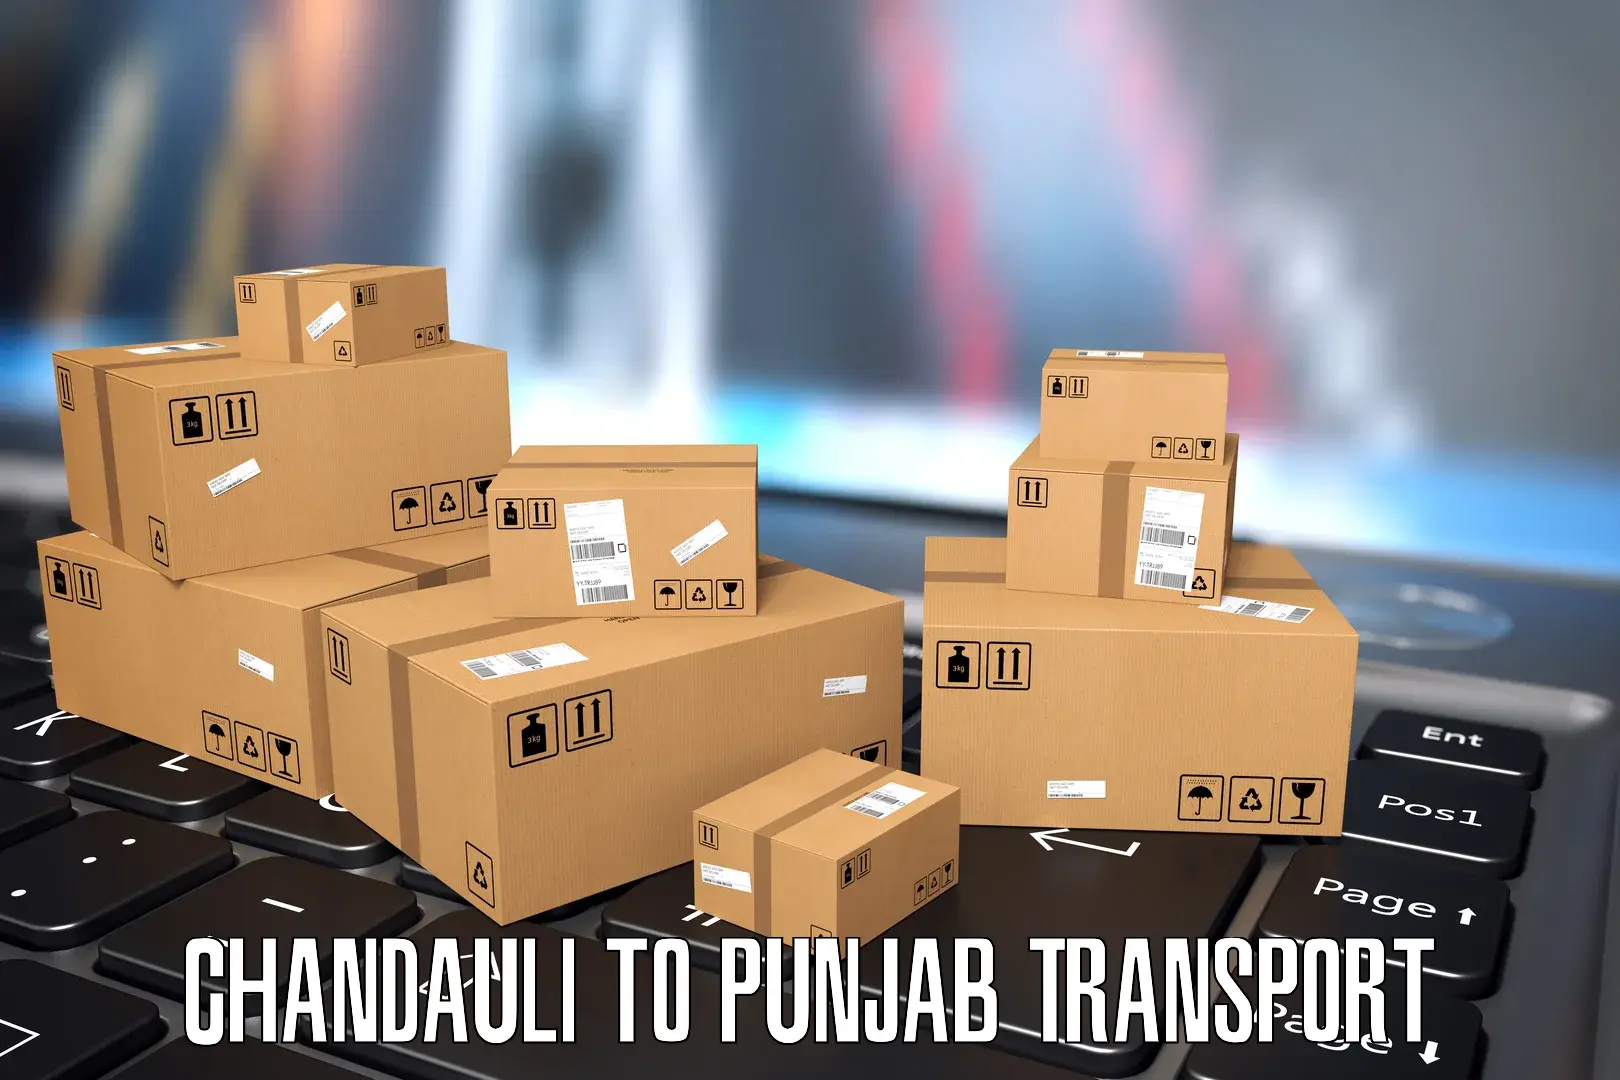 Daily transport service in Chandauli to Mohali